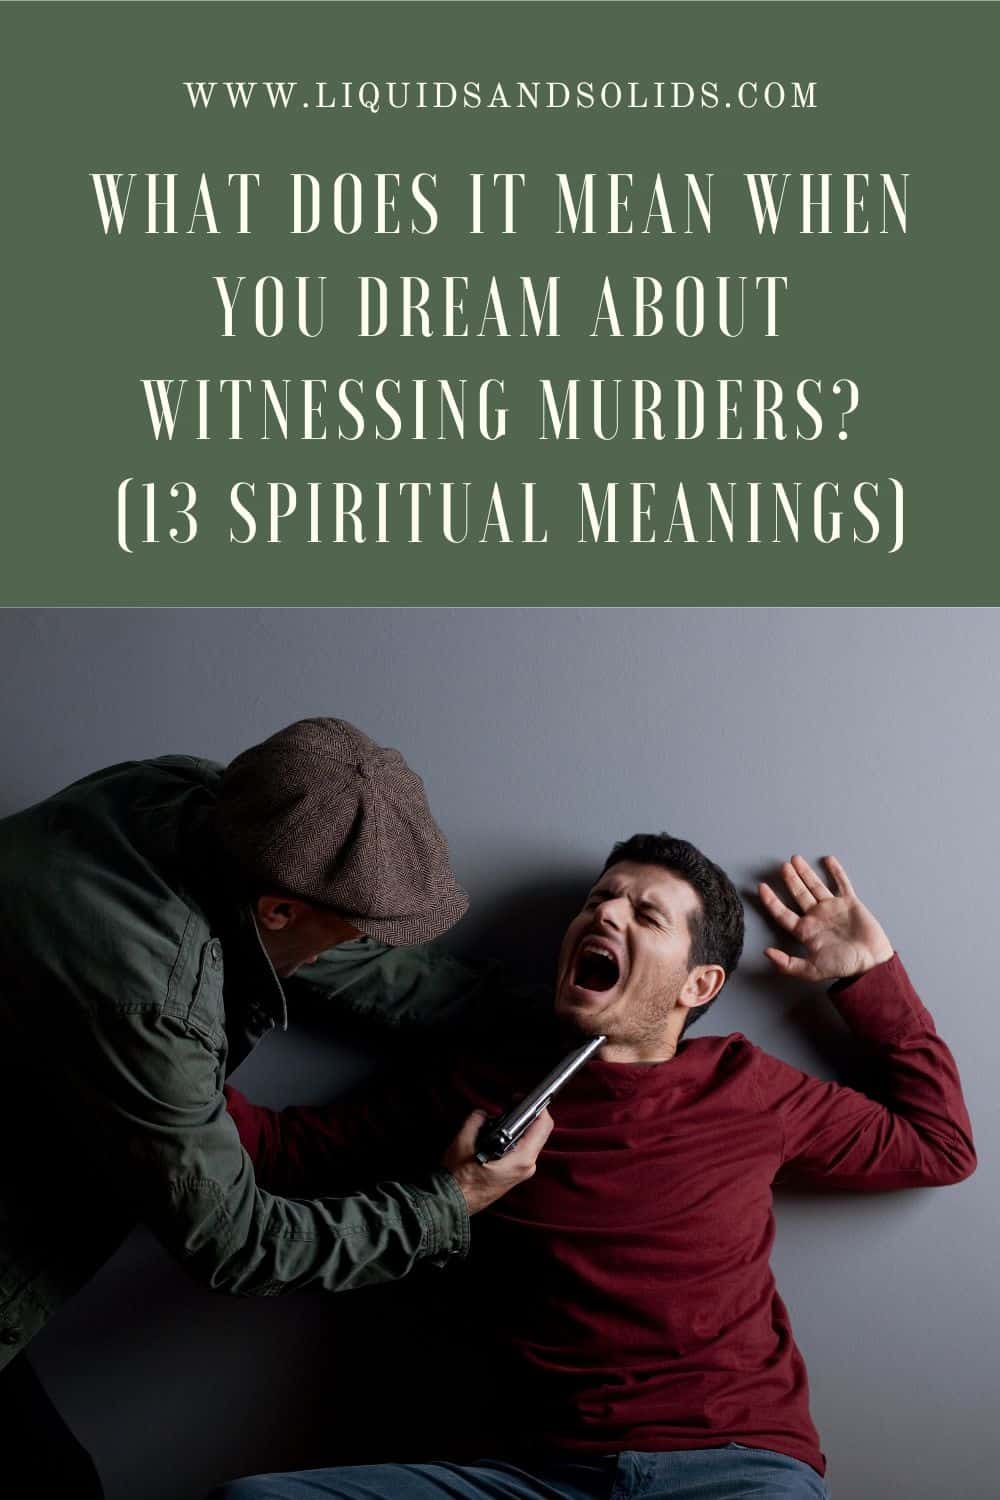 What Does It Mean When You Dream About Witnessing Murders? (13 Spiritual Meanings)